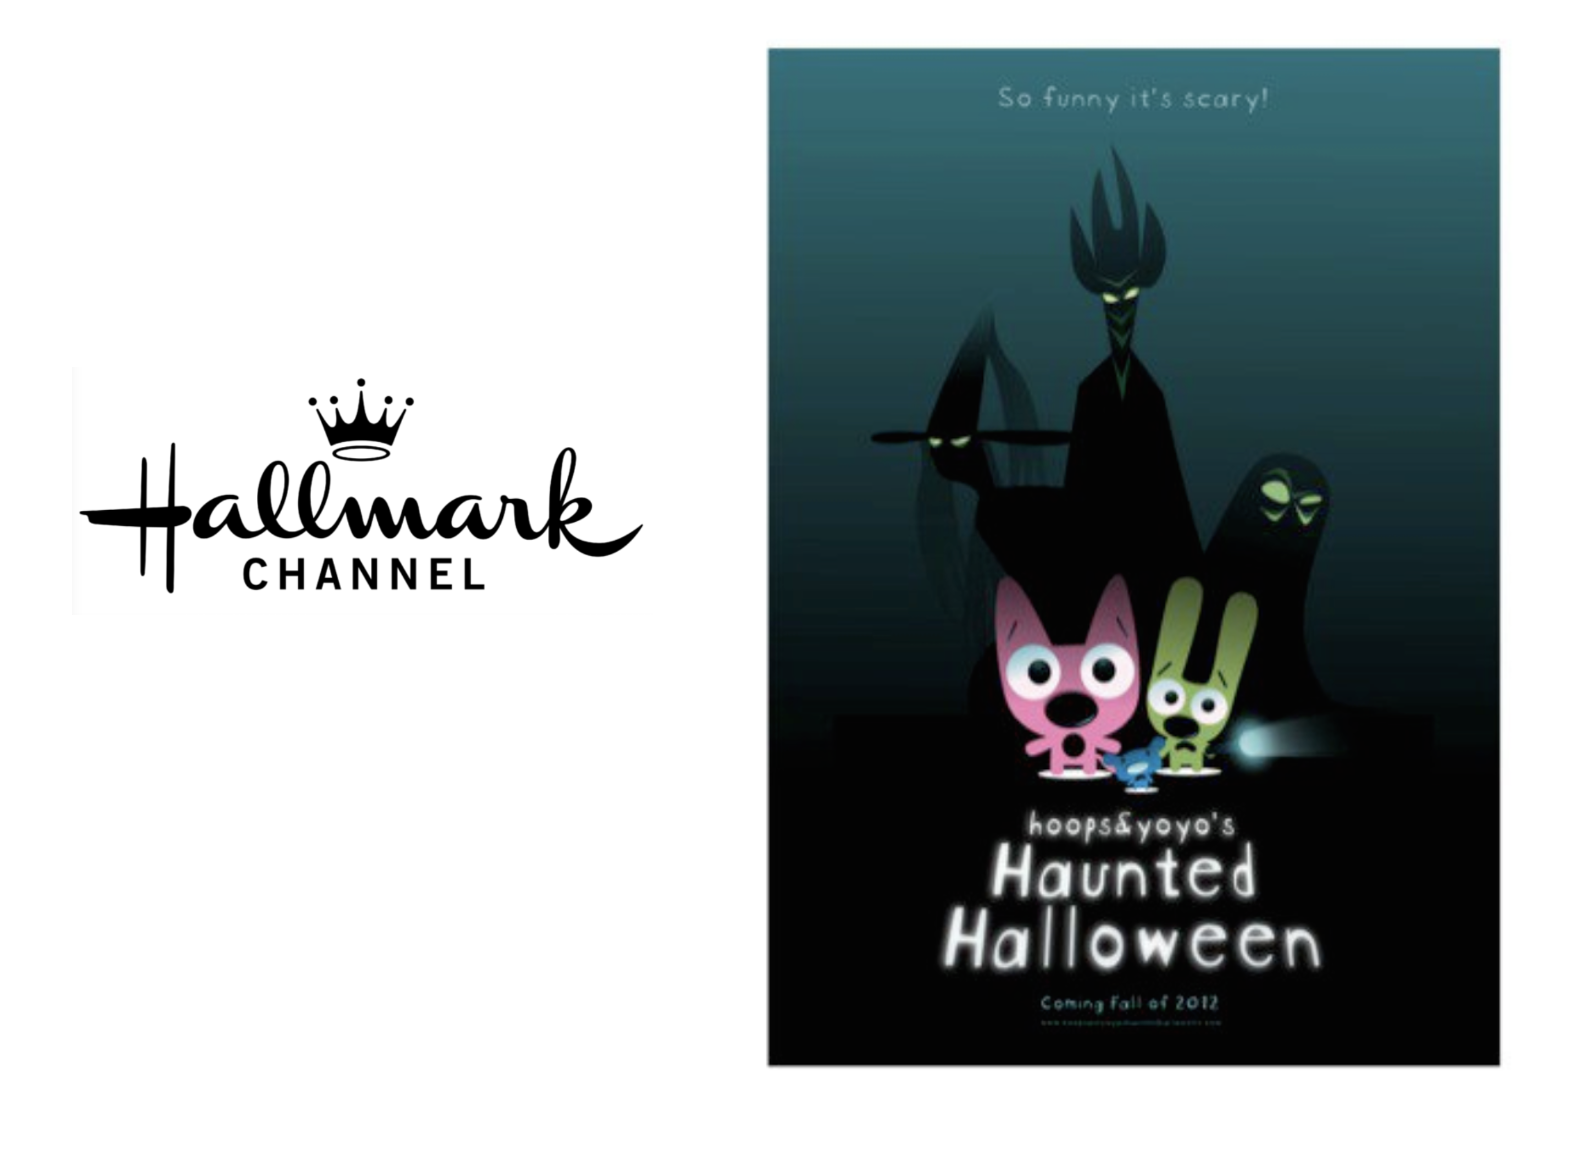   A 30 minute Halloween special in 2D animation that aired on CBS .  